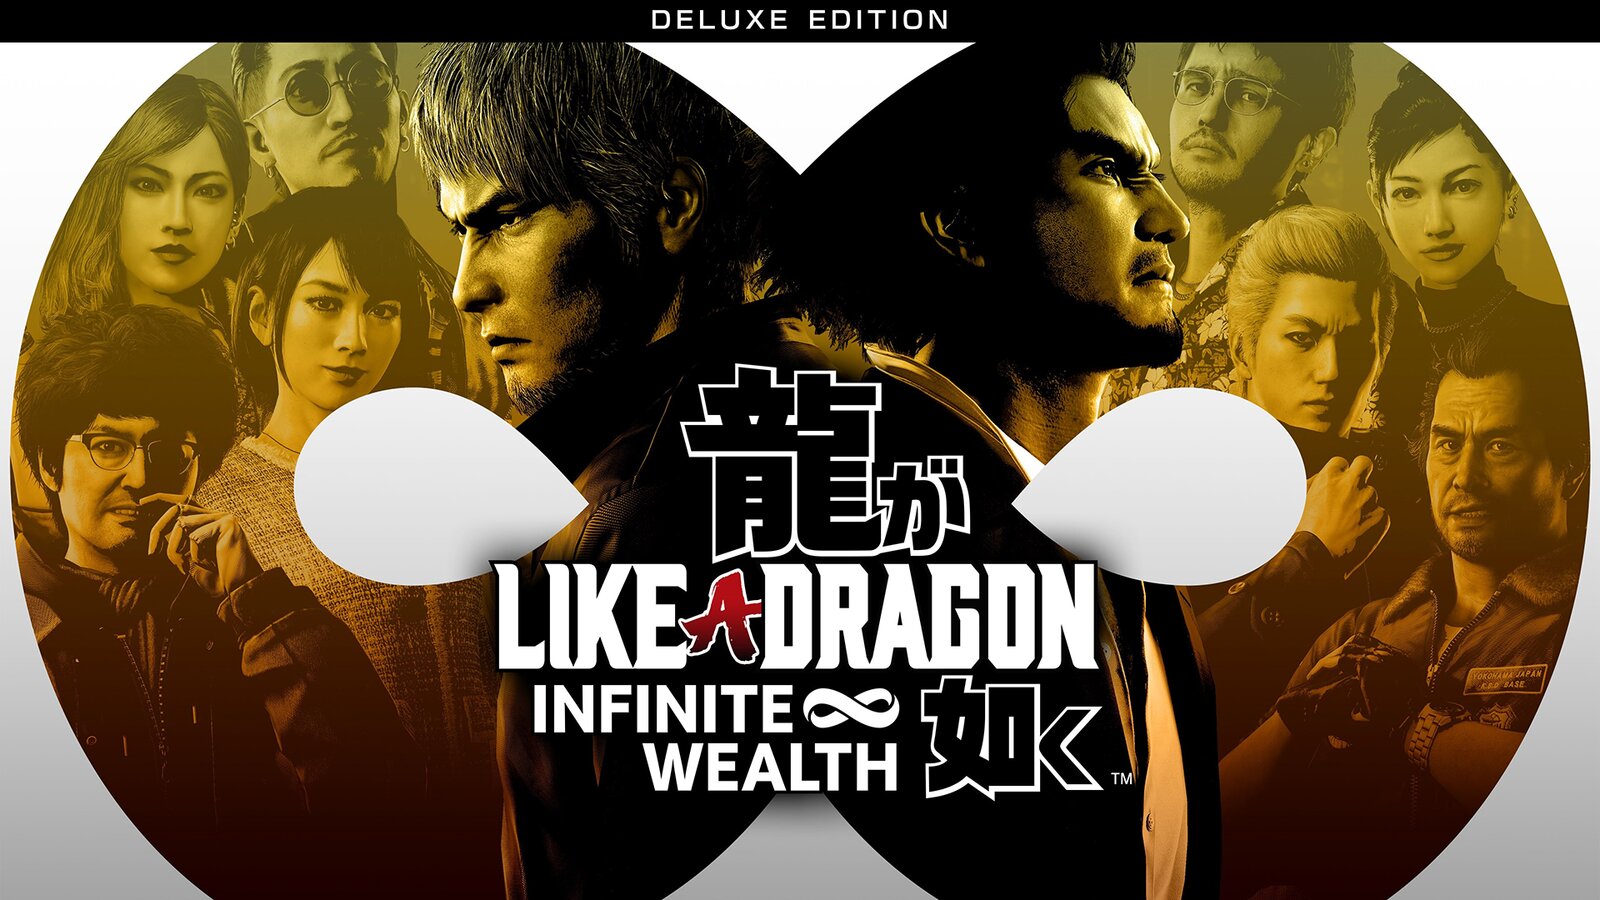 Like a Dragon: Infinite Wealth - Deluxe Edition